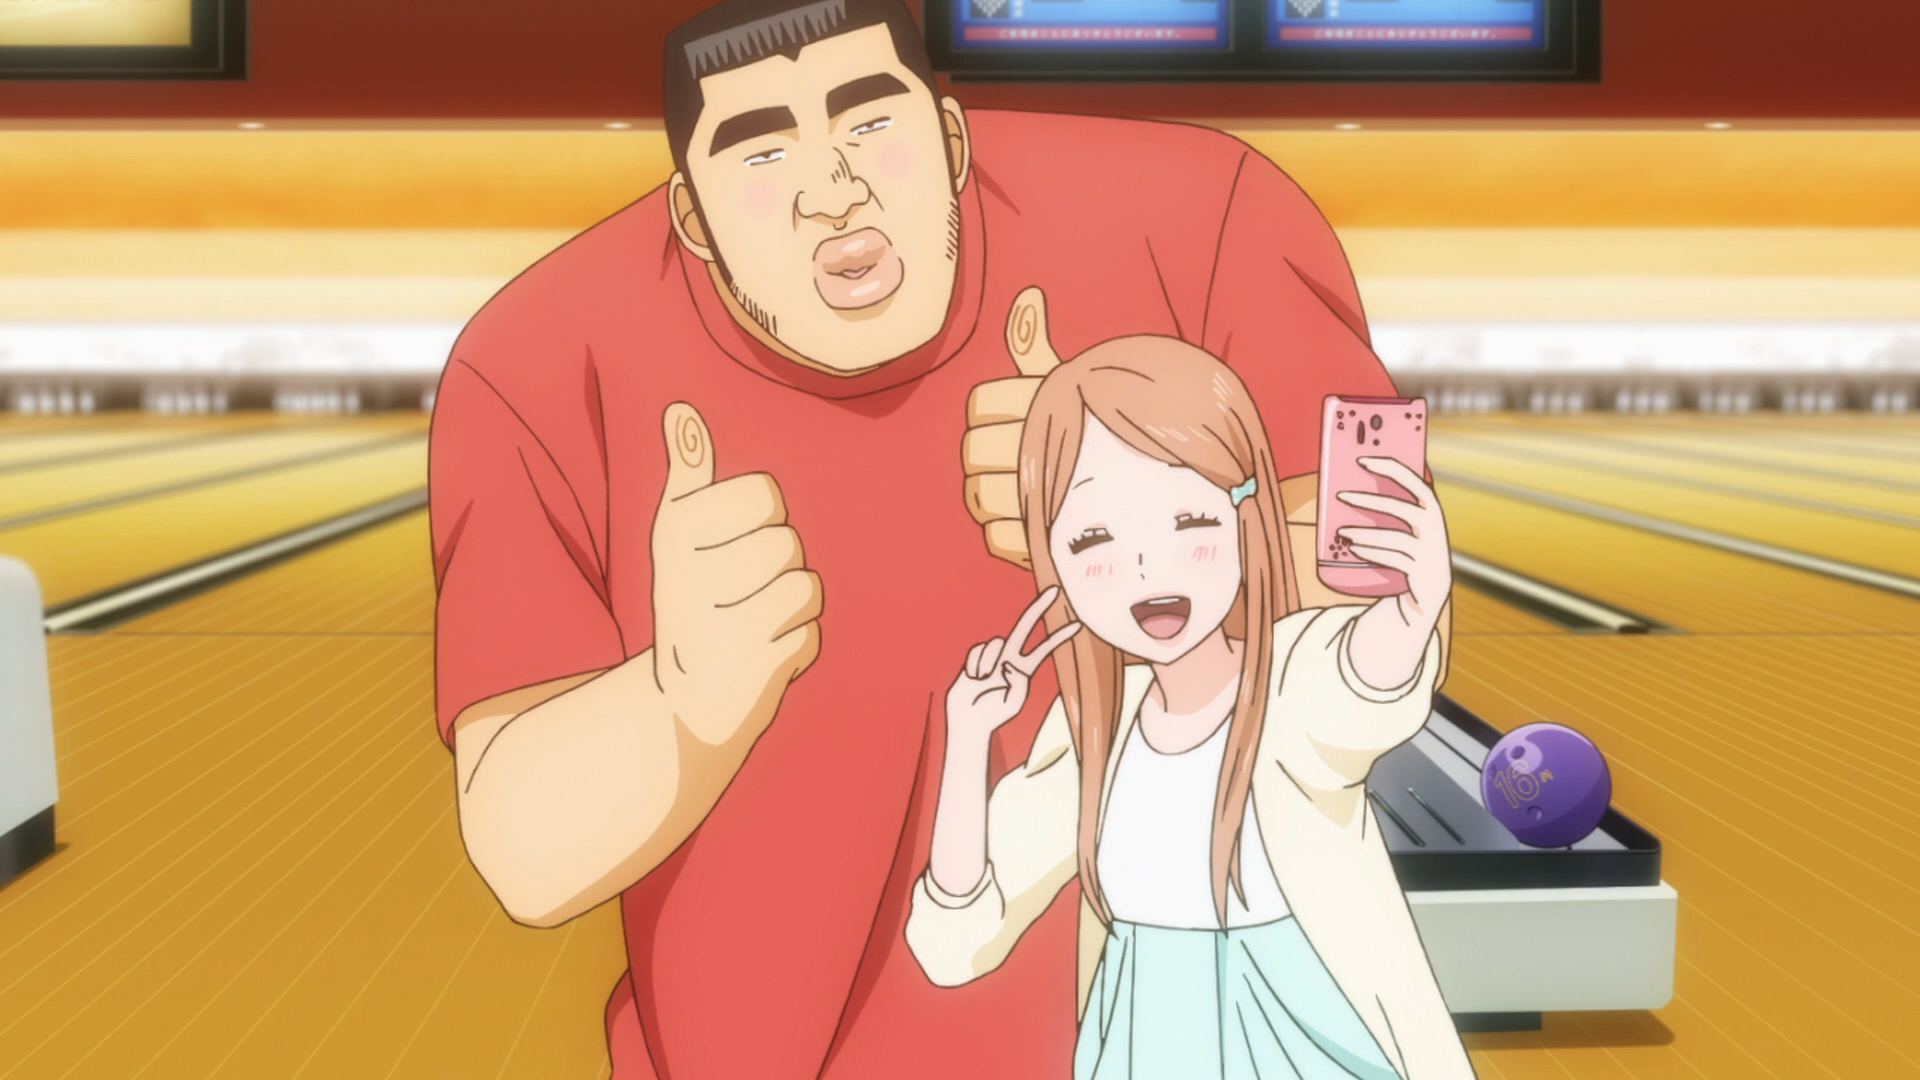 Takeo Goda and Rinko Yamato take a selfie together at a bowling alley in a scene from the MY love STORY !! TV anime.